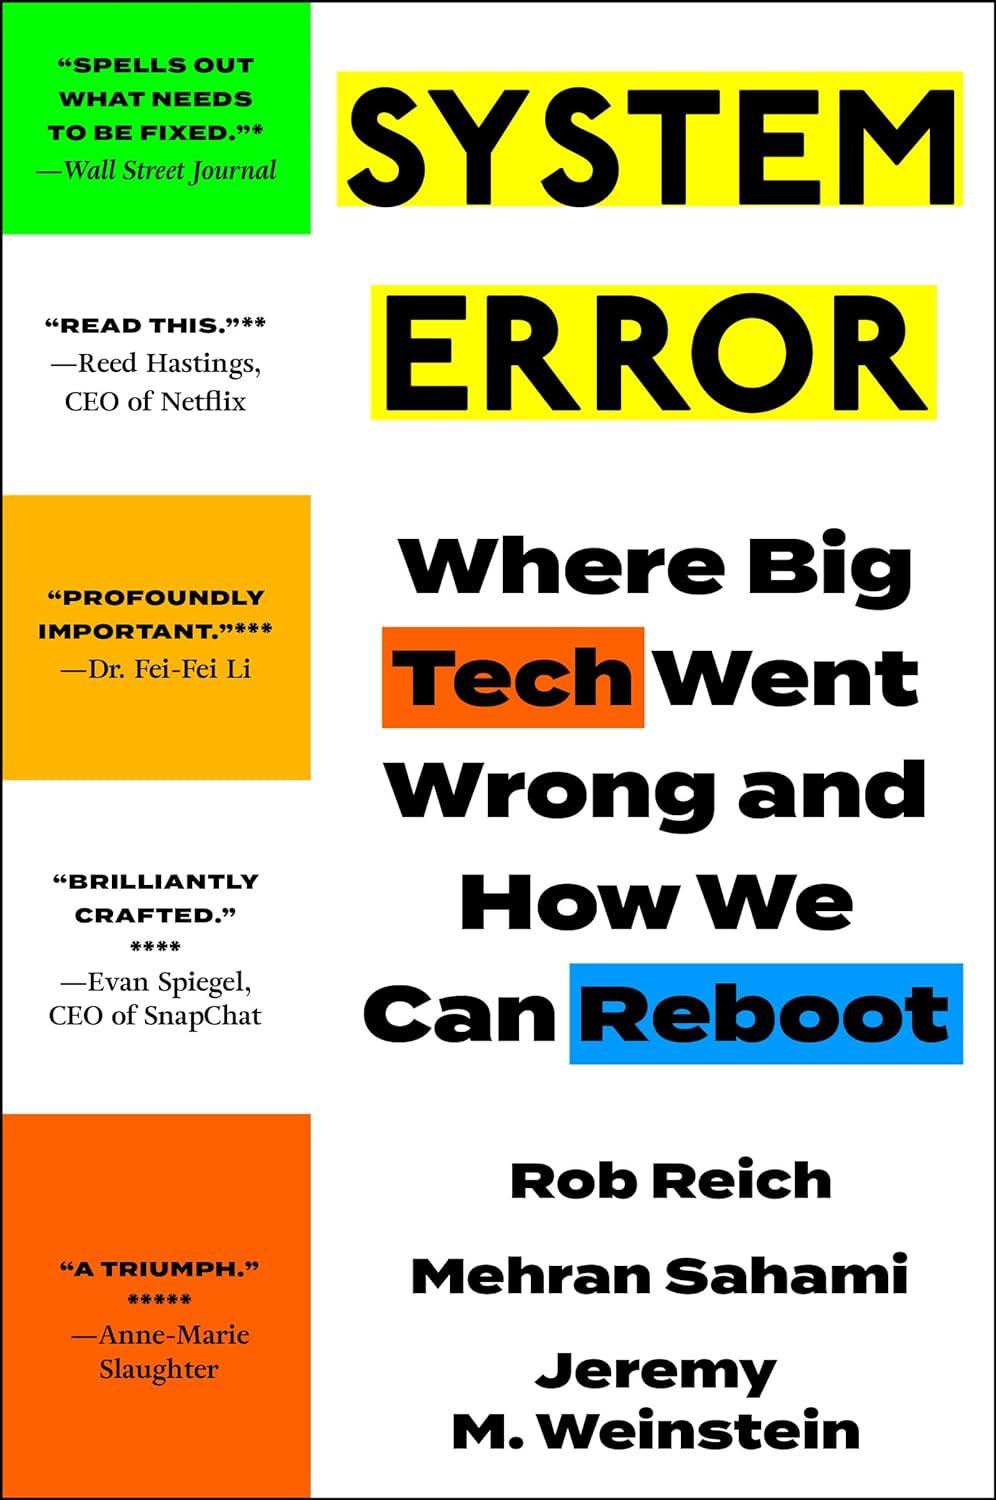 system error  where big tech went wrong and how we can reboot 1st edition rob reich, mehran sahami, jeremy m.